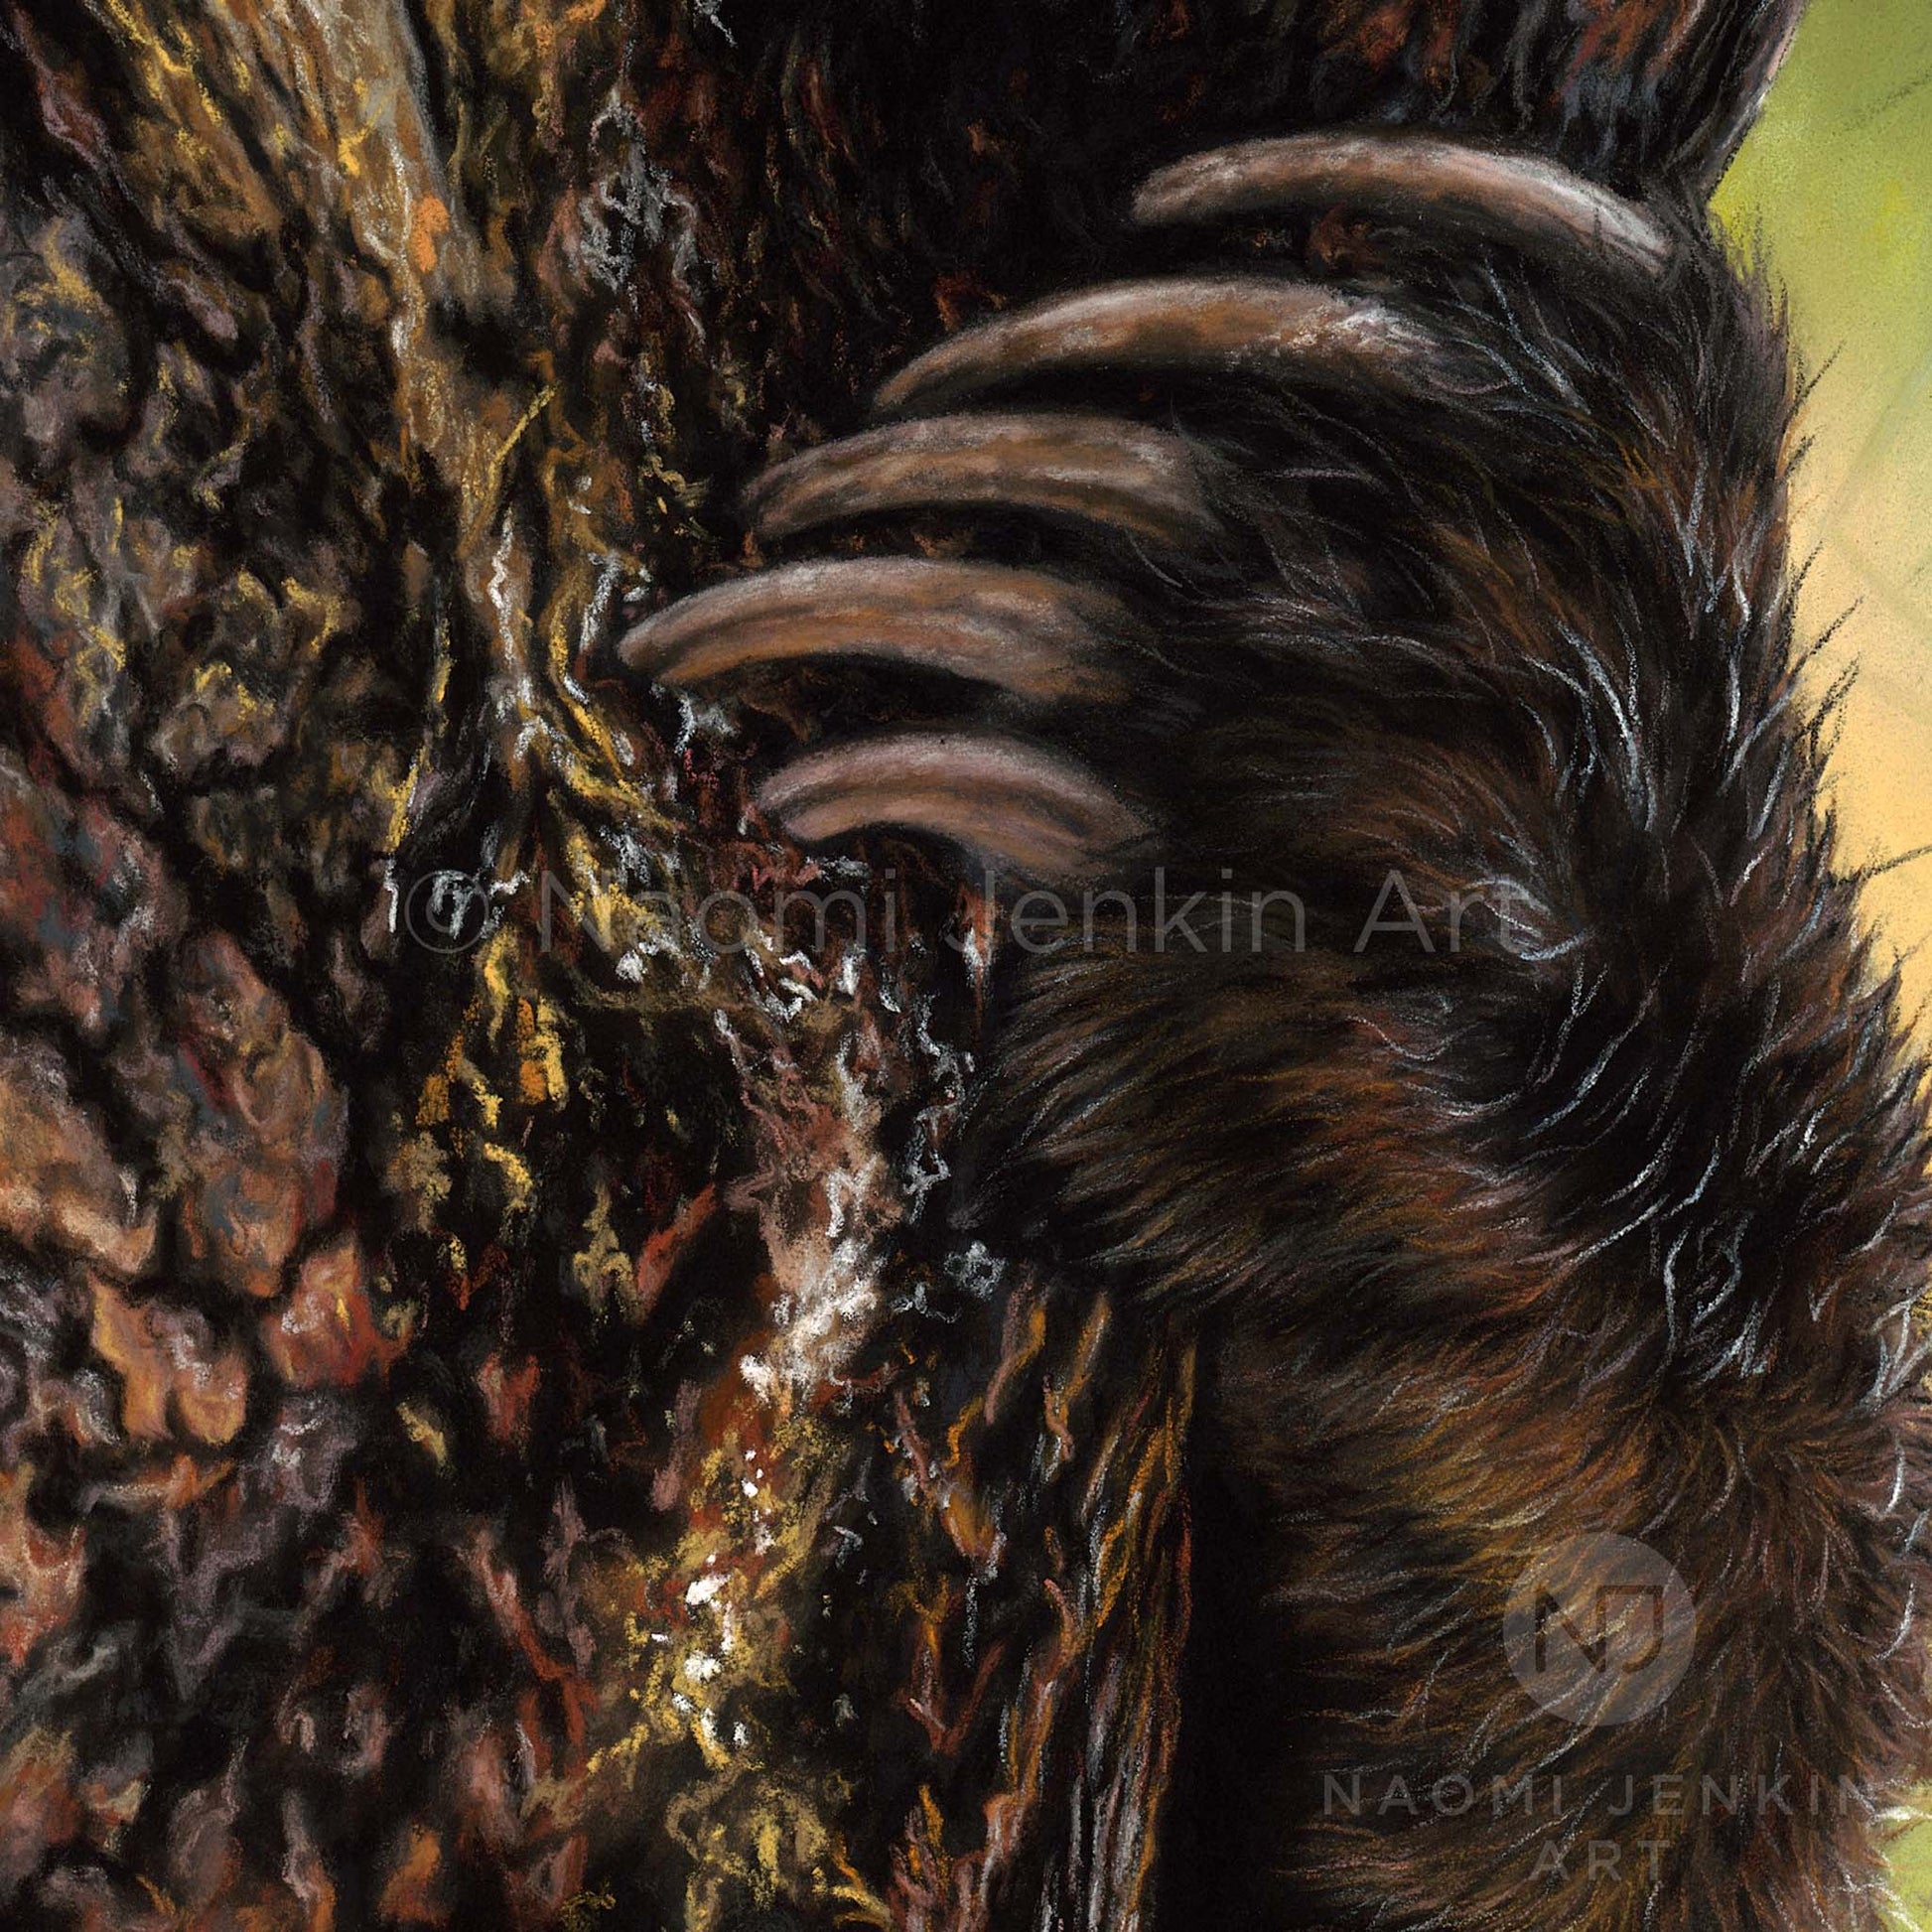 Close up drawing of a grizzly bear's fur by artist Naomi Jenkin as part of the 'Peekaboo' bear print